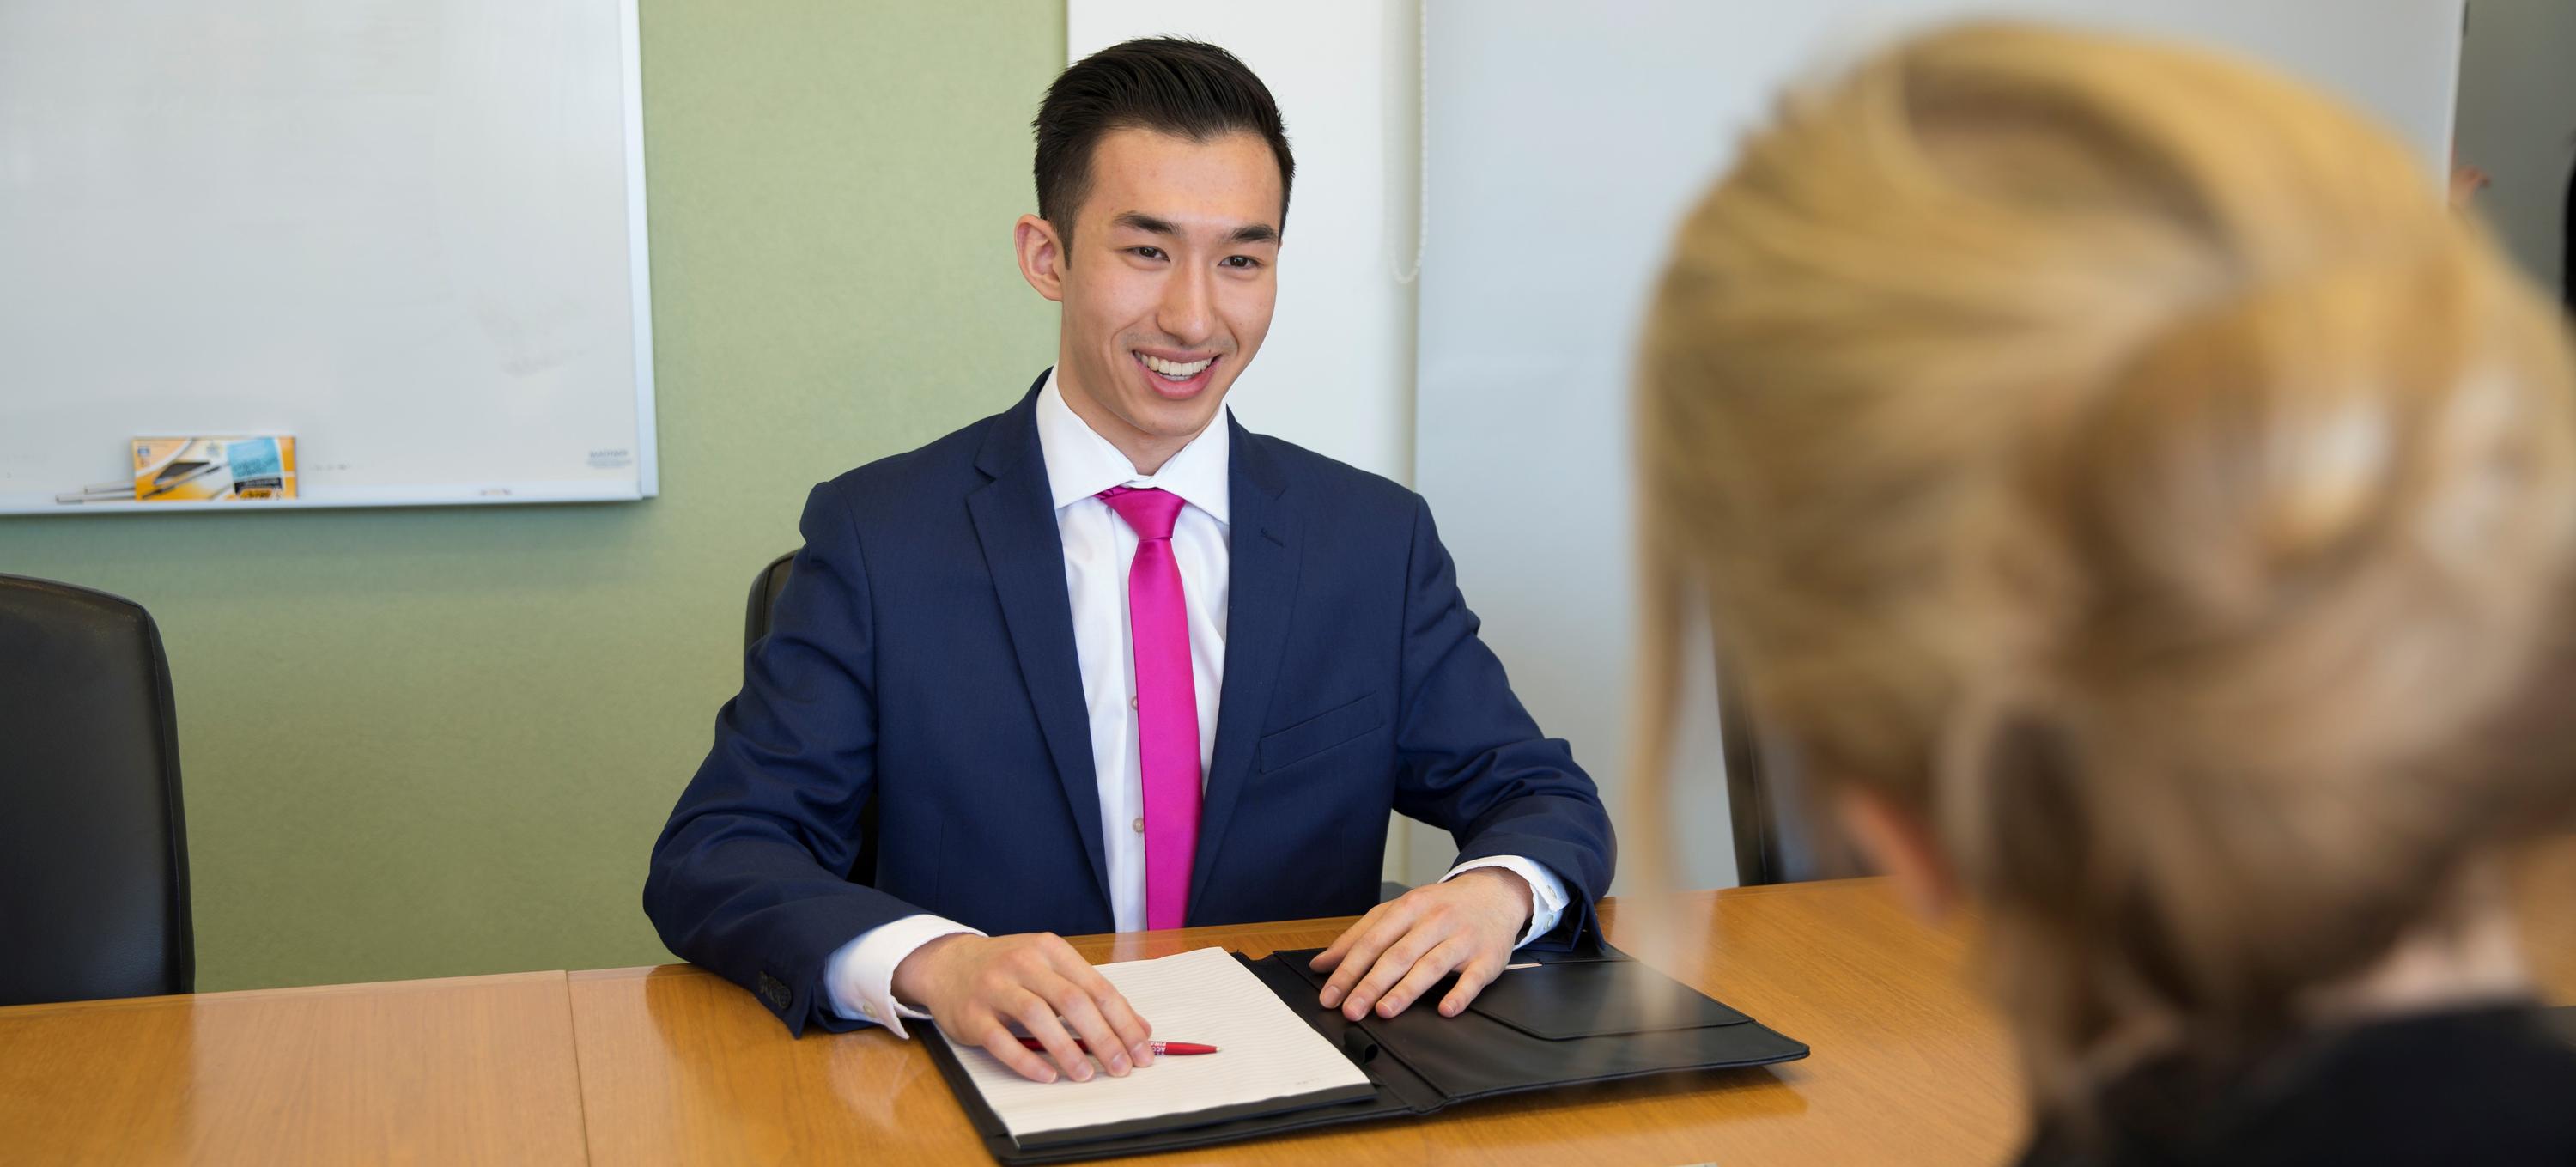 Male CFM student interviewing for a job